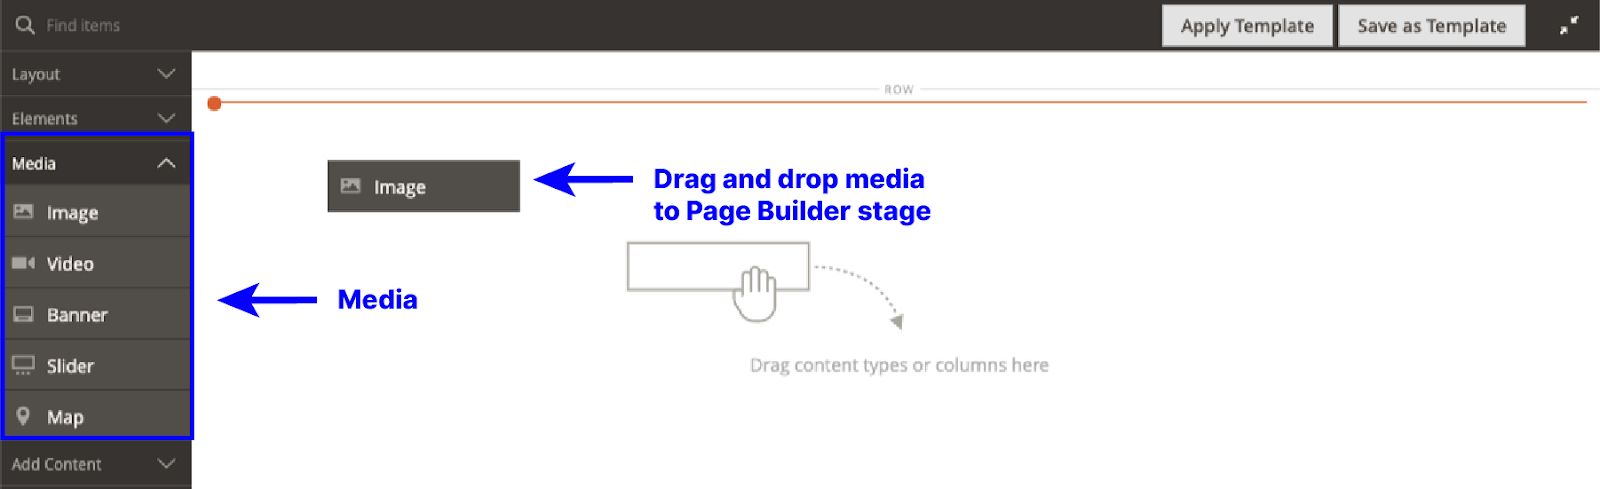 Drag and drop media components to the Page Builder staging area